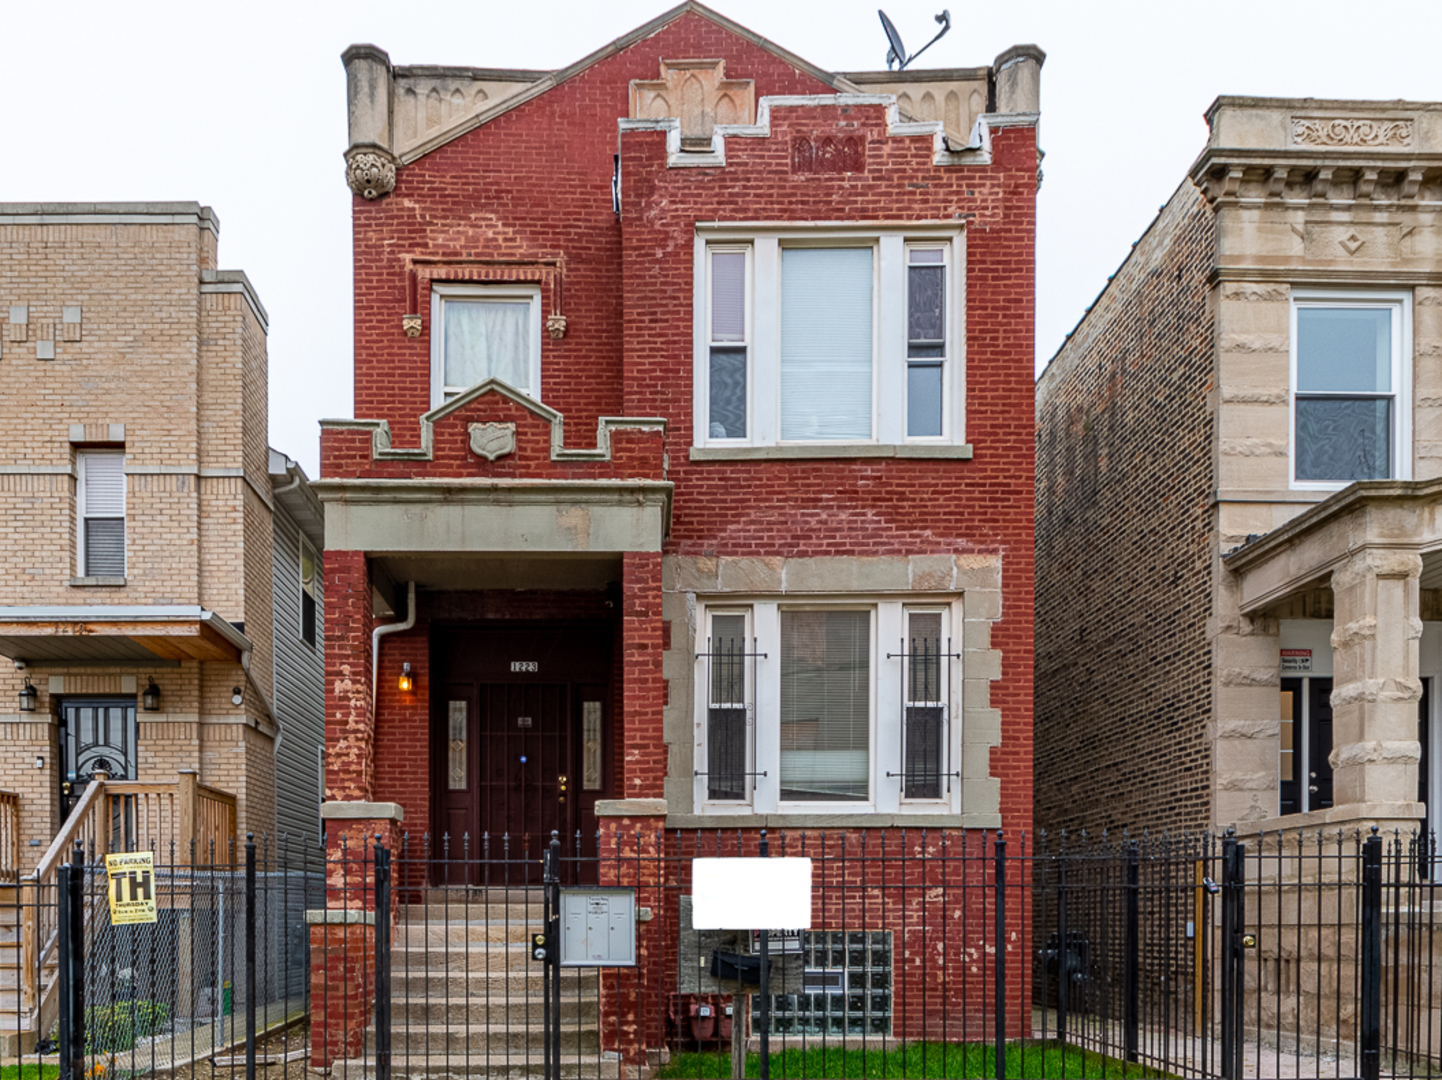 1223 S St Louis Ave, Chicago, IL 60623 - MLS 10561128 - Coldwell Banker